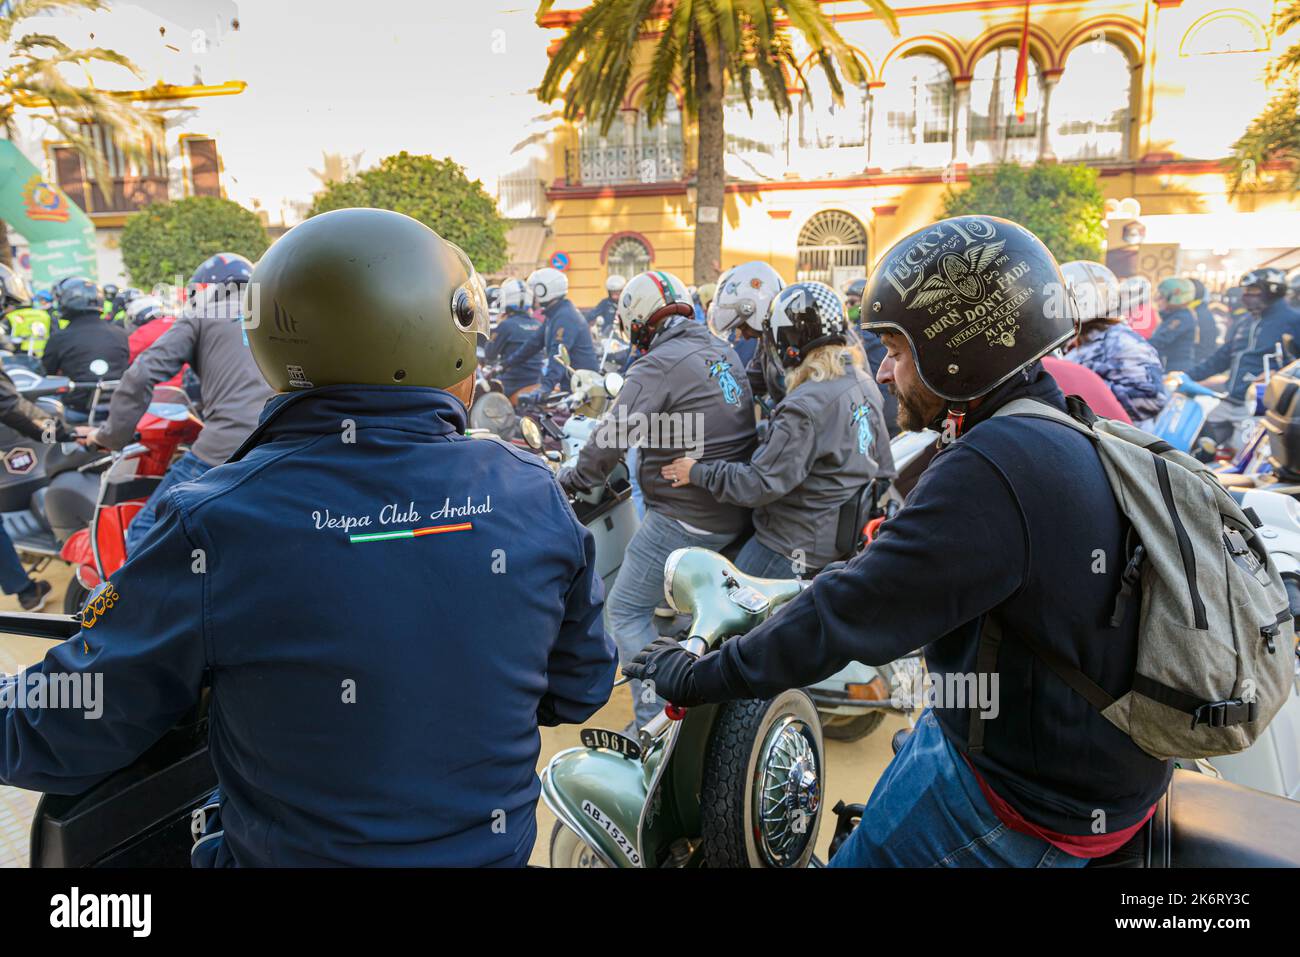 Arahal, Seville.Spain. October 15, 2022. In October, 'El Avispero' (The Wasp's Nest) is held in Arahal (Seville). A meeting of Vespa scooter enthusias Stock Photo